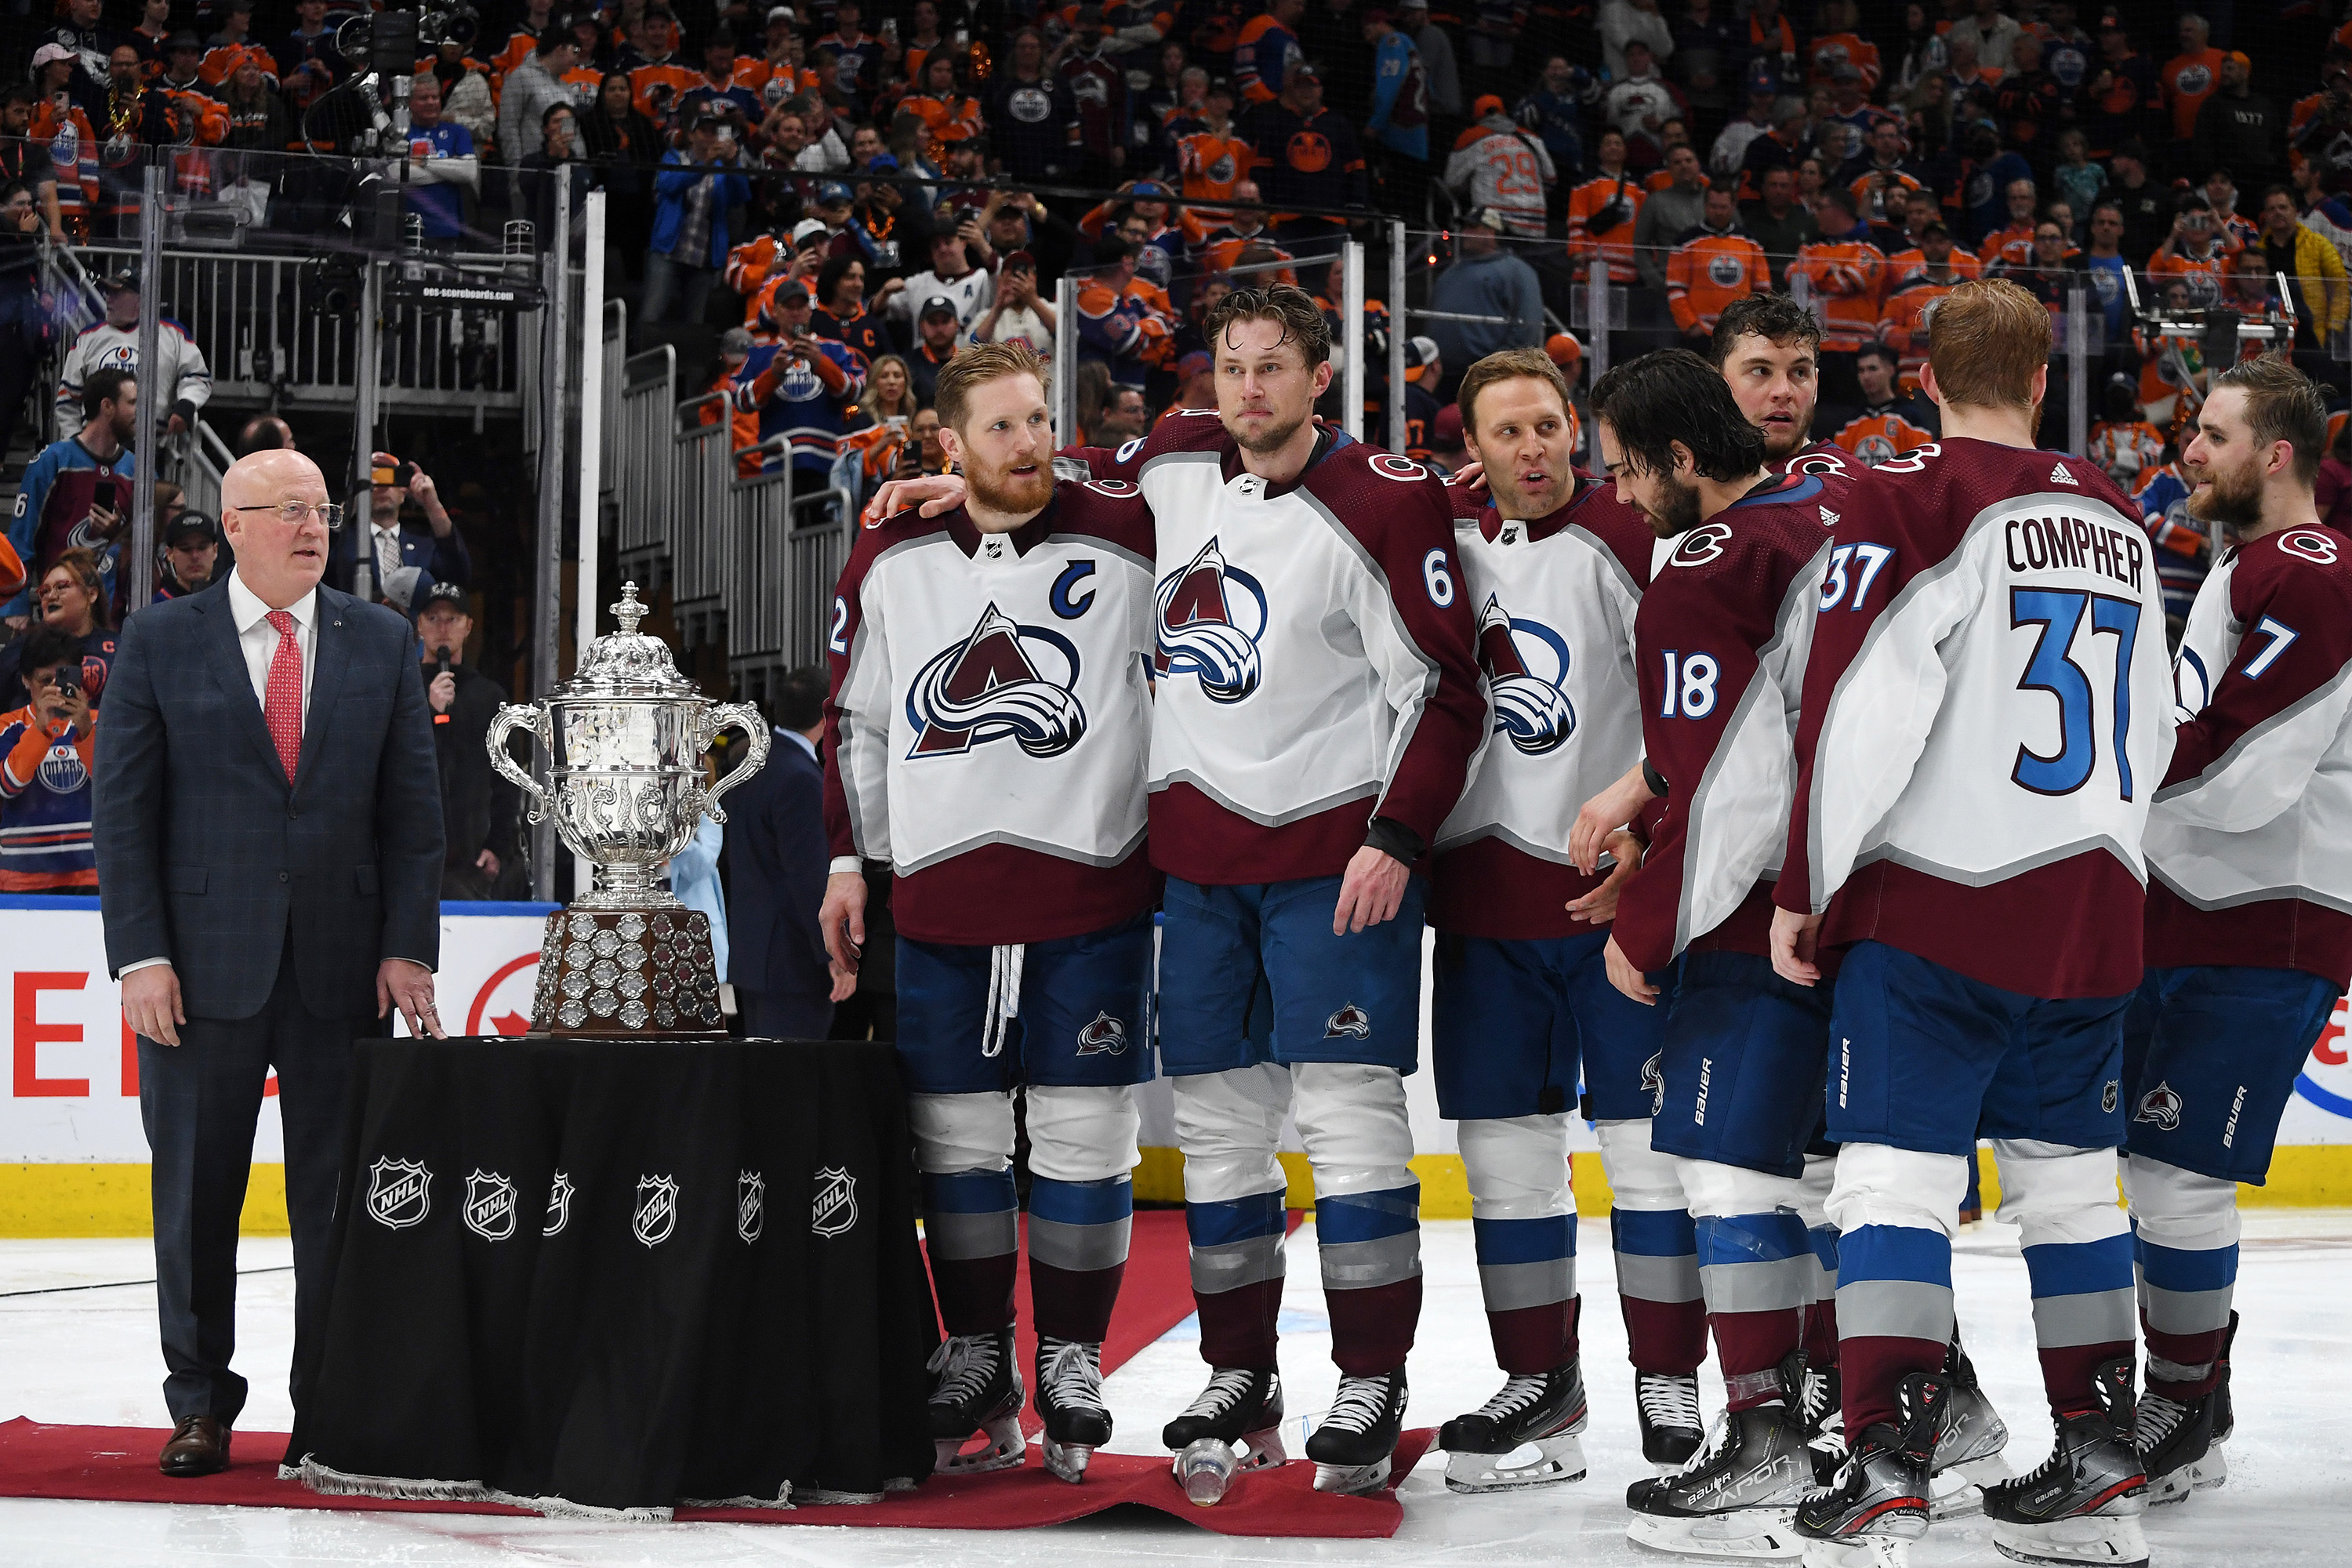 Gabriel Landeskog #92 and the Colorado Avalanche wait for the presentation of the Clarence S. Campbell Bowl after defeating the Edmonton Oilers 6-5 in overtime in Game Four of the Western Conference Final of the 2022 Stanley Cup Playoffs at Rogers Place on June 6, 2022 in Edmonton, Alberta.